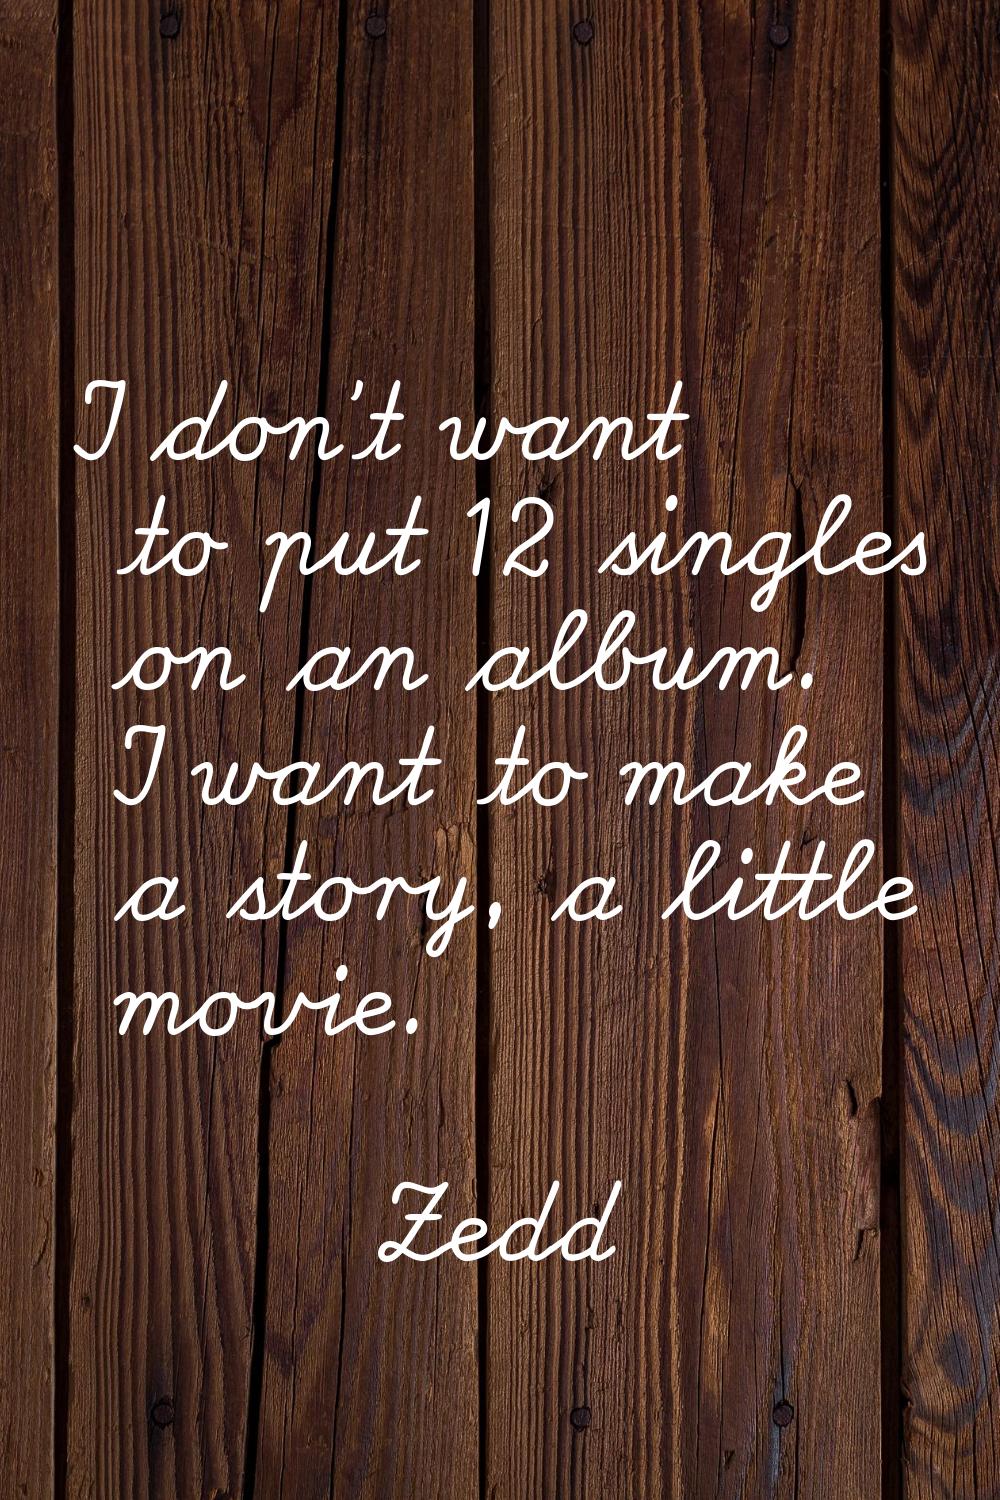 I don't want to put 12 singles on an album. I want to make a story, a little movie.